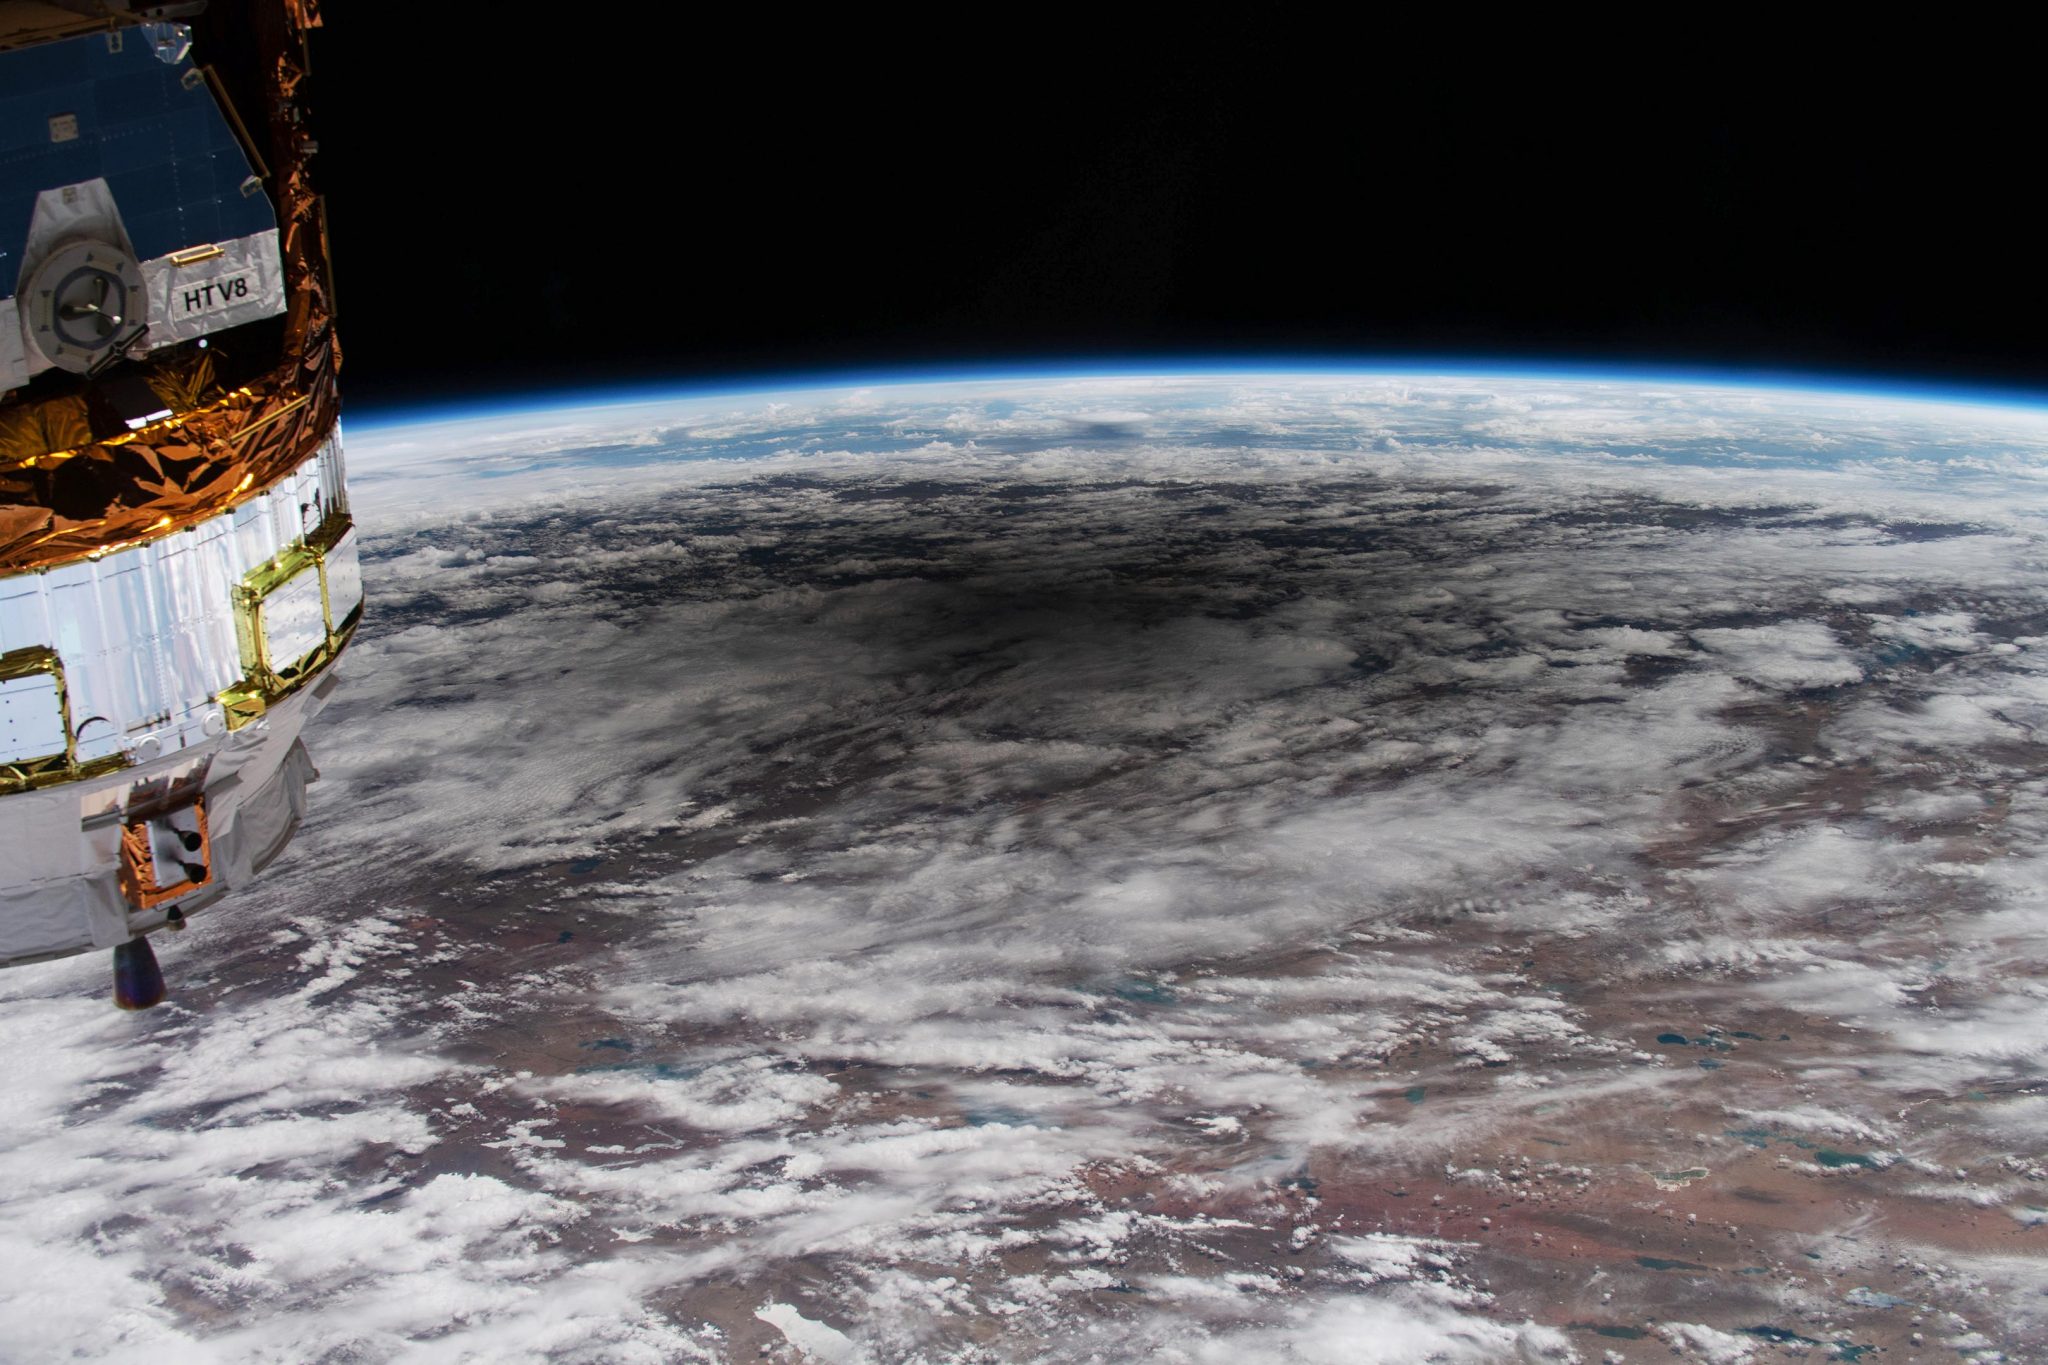 Incredible Astronaut’s View of an Annular “Ring of Fire” Eclipse